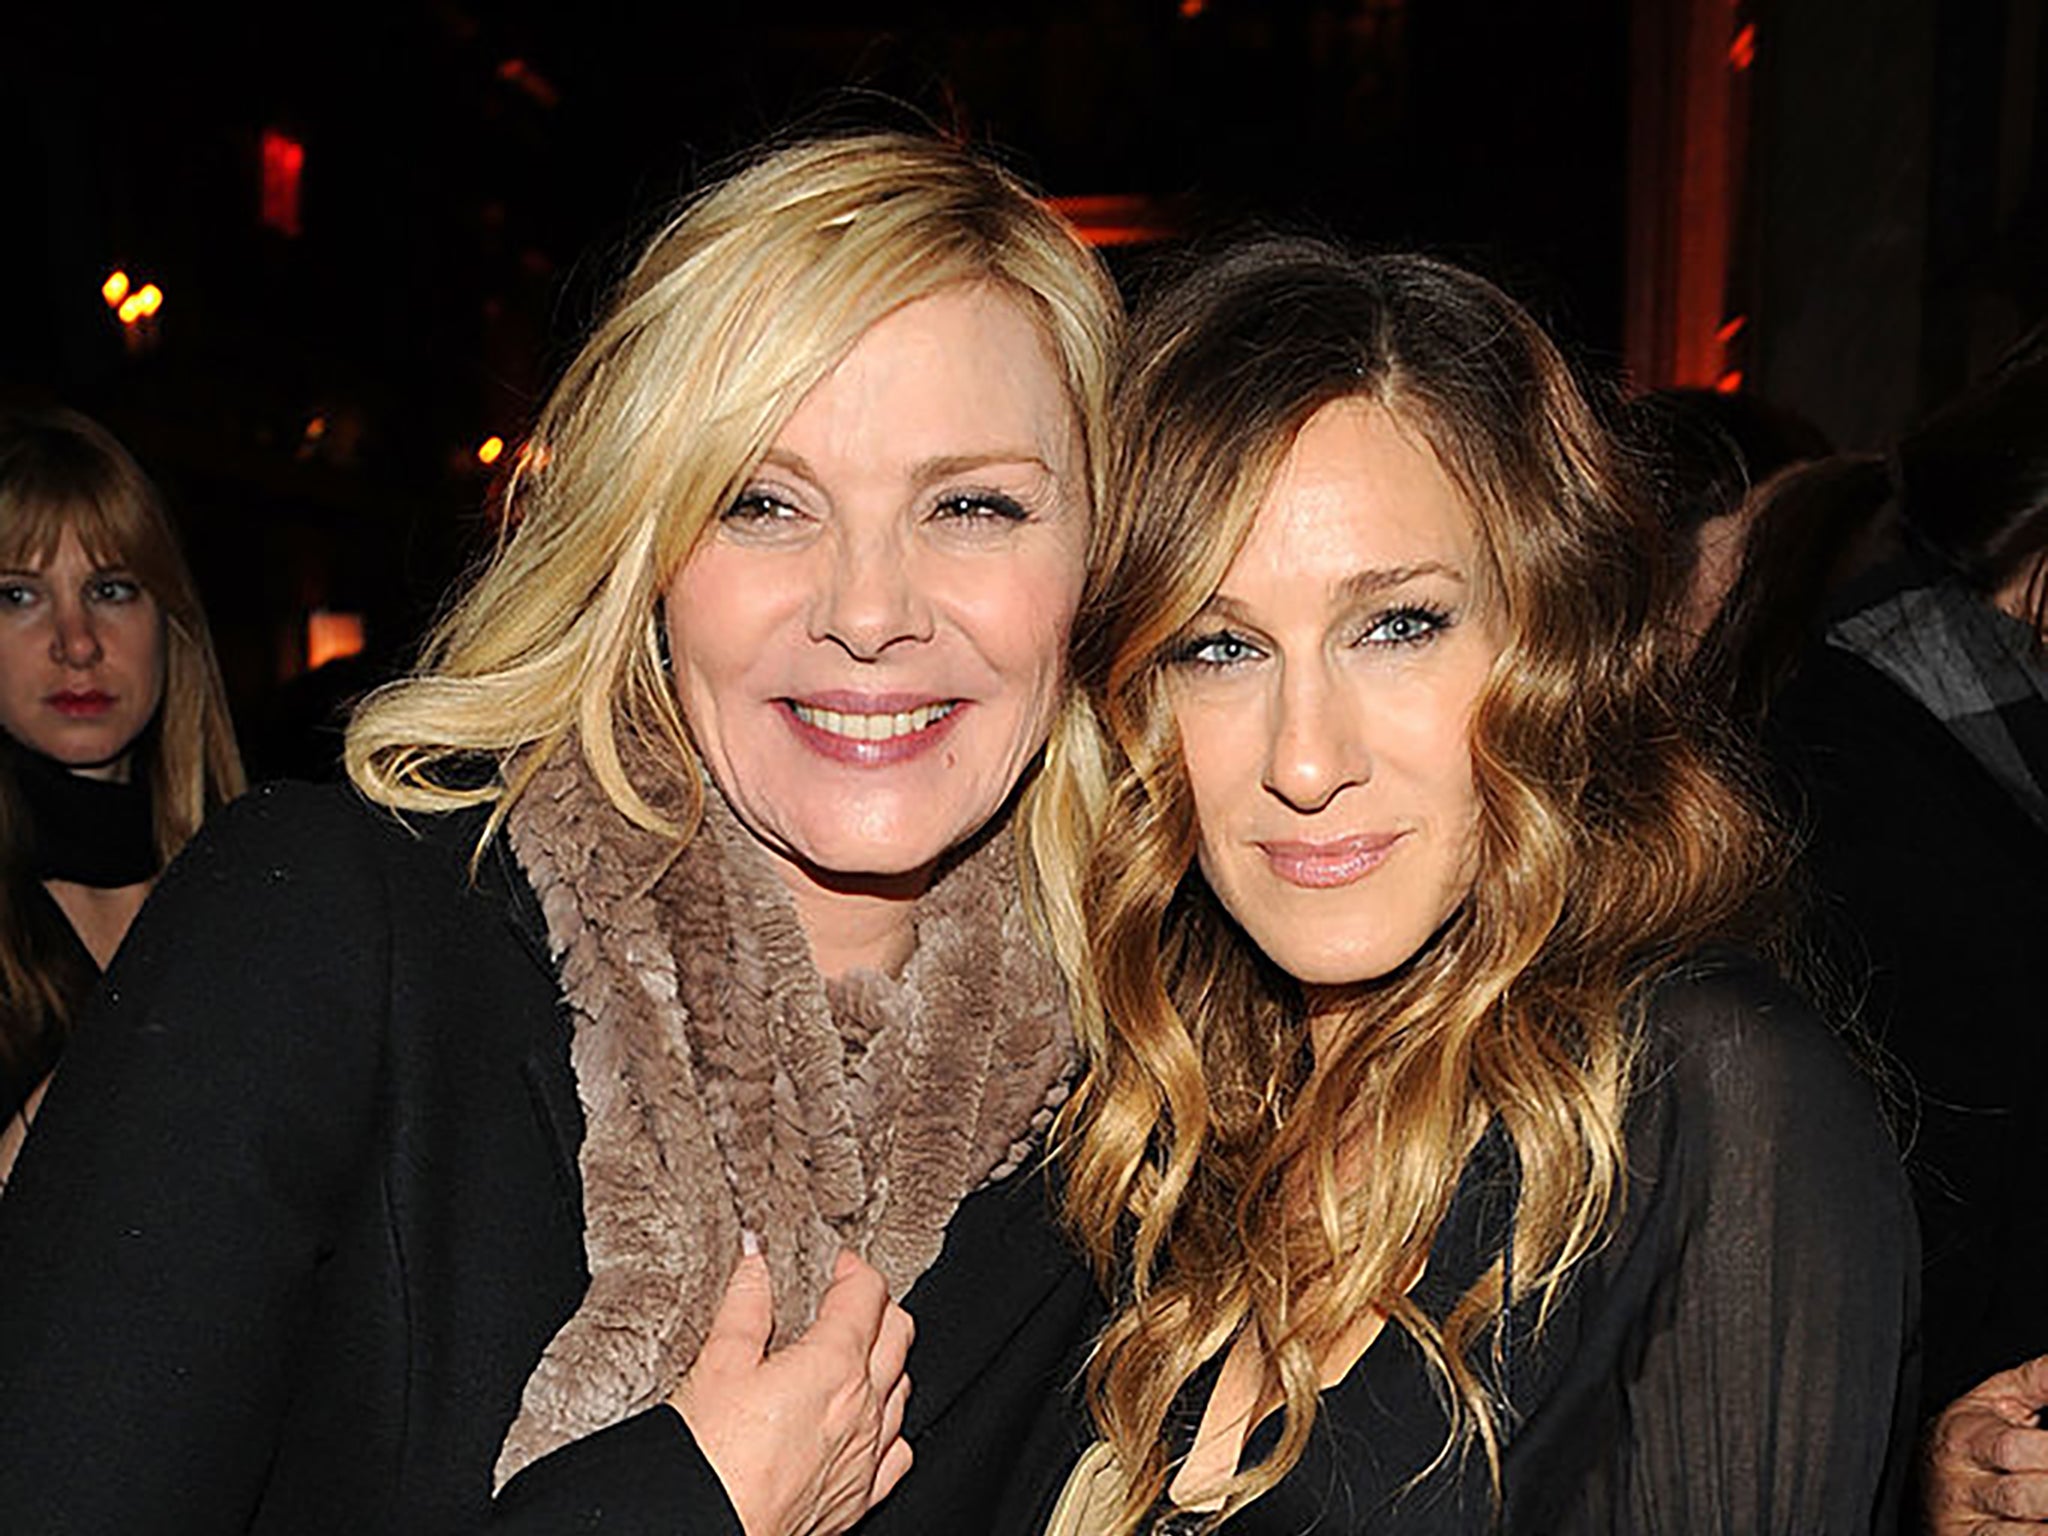 Kim Cattrall and Sarah Jessica Parker at a film premiere in 2009